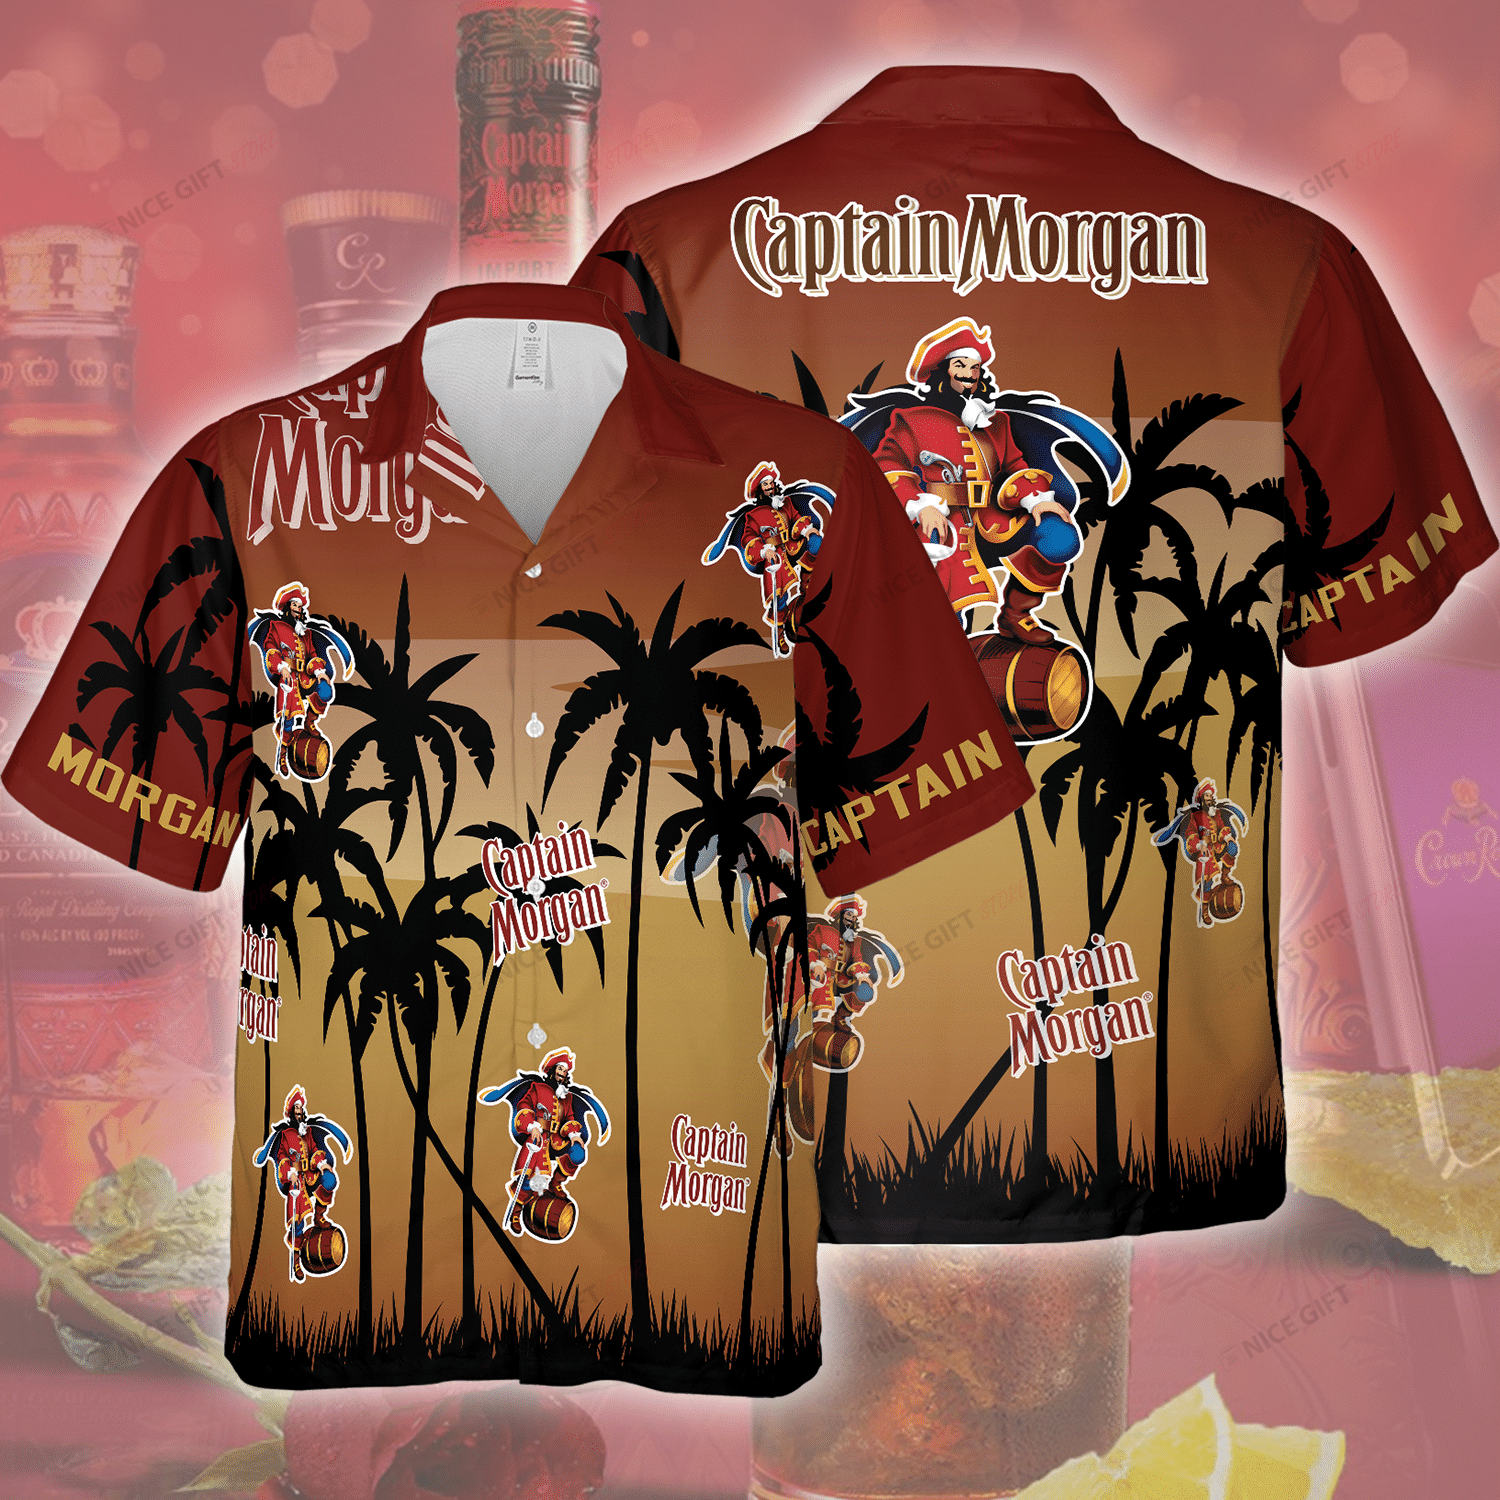 There are several types of Hawaiian shirts available on the market 123